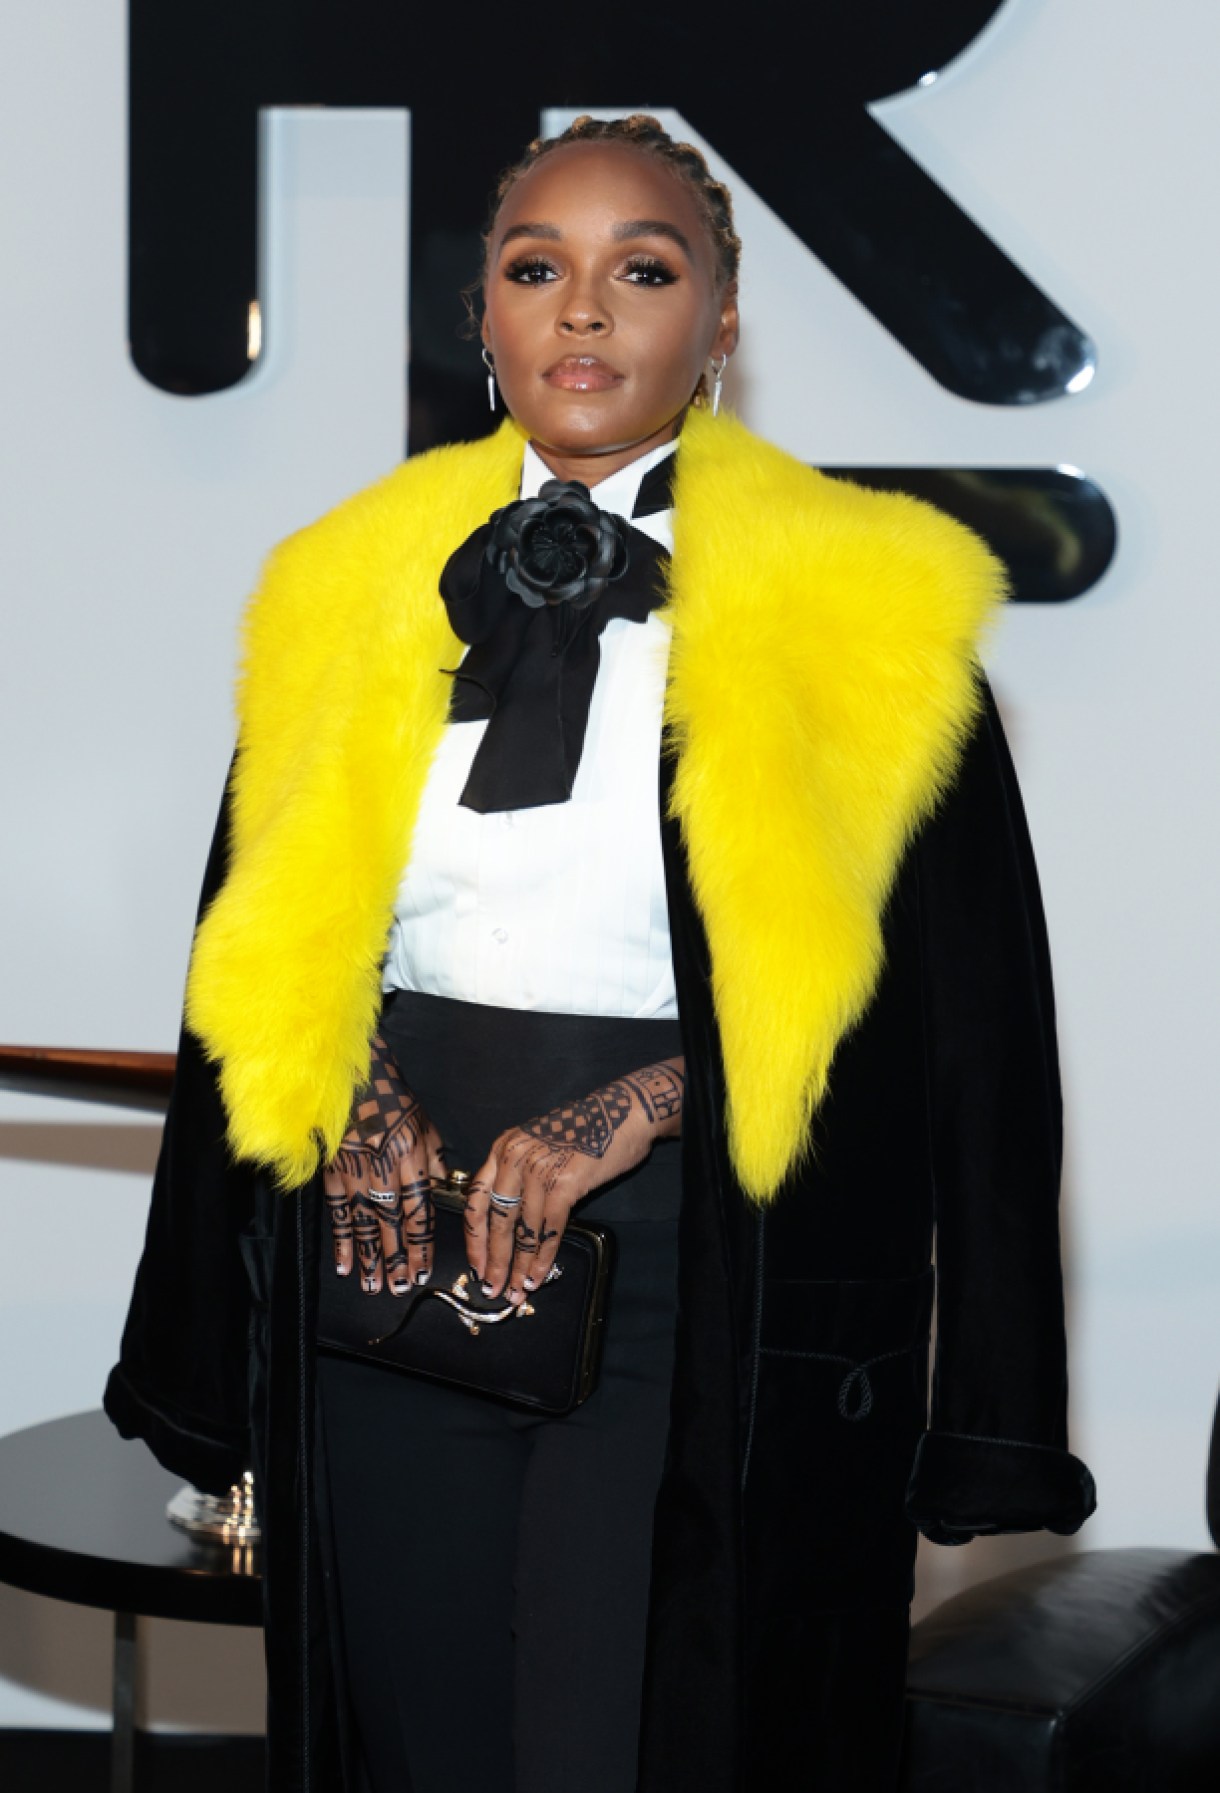 NEW YORK, NEW YORK - MARCH 22: Janelle Monáe attends the Ralph Lauren Fall 2022 fashion show at Museum of Modern Art on March 22, 2022 in New York City. (Photo by Dimitrios Kambouris/Getty Images)